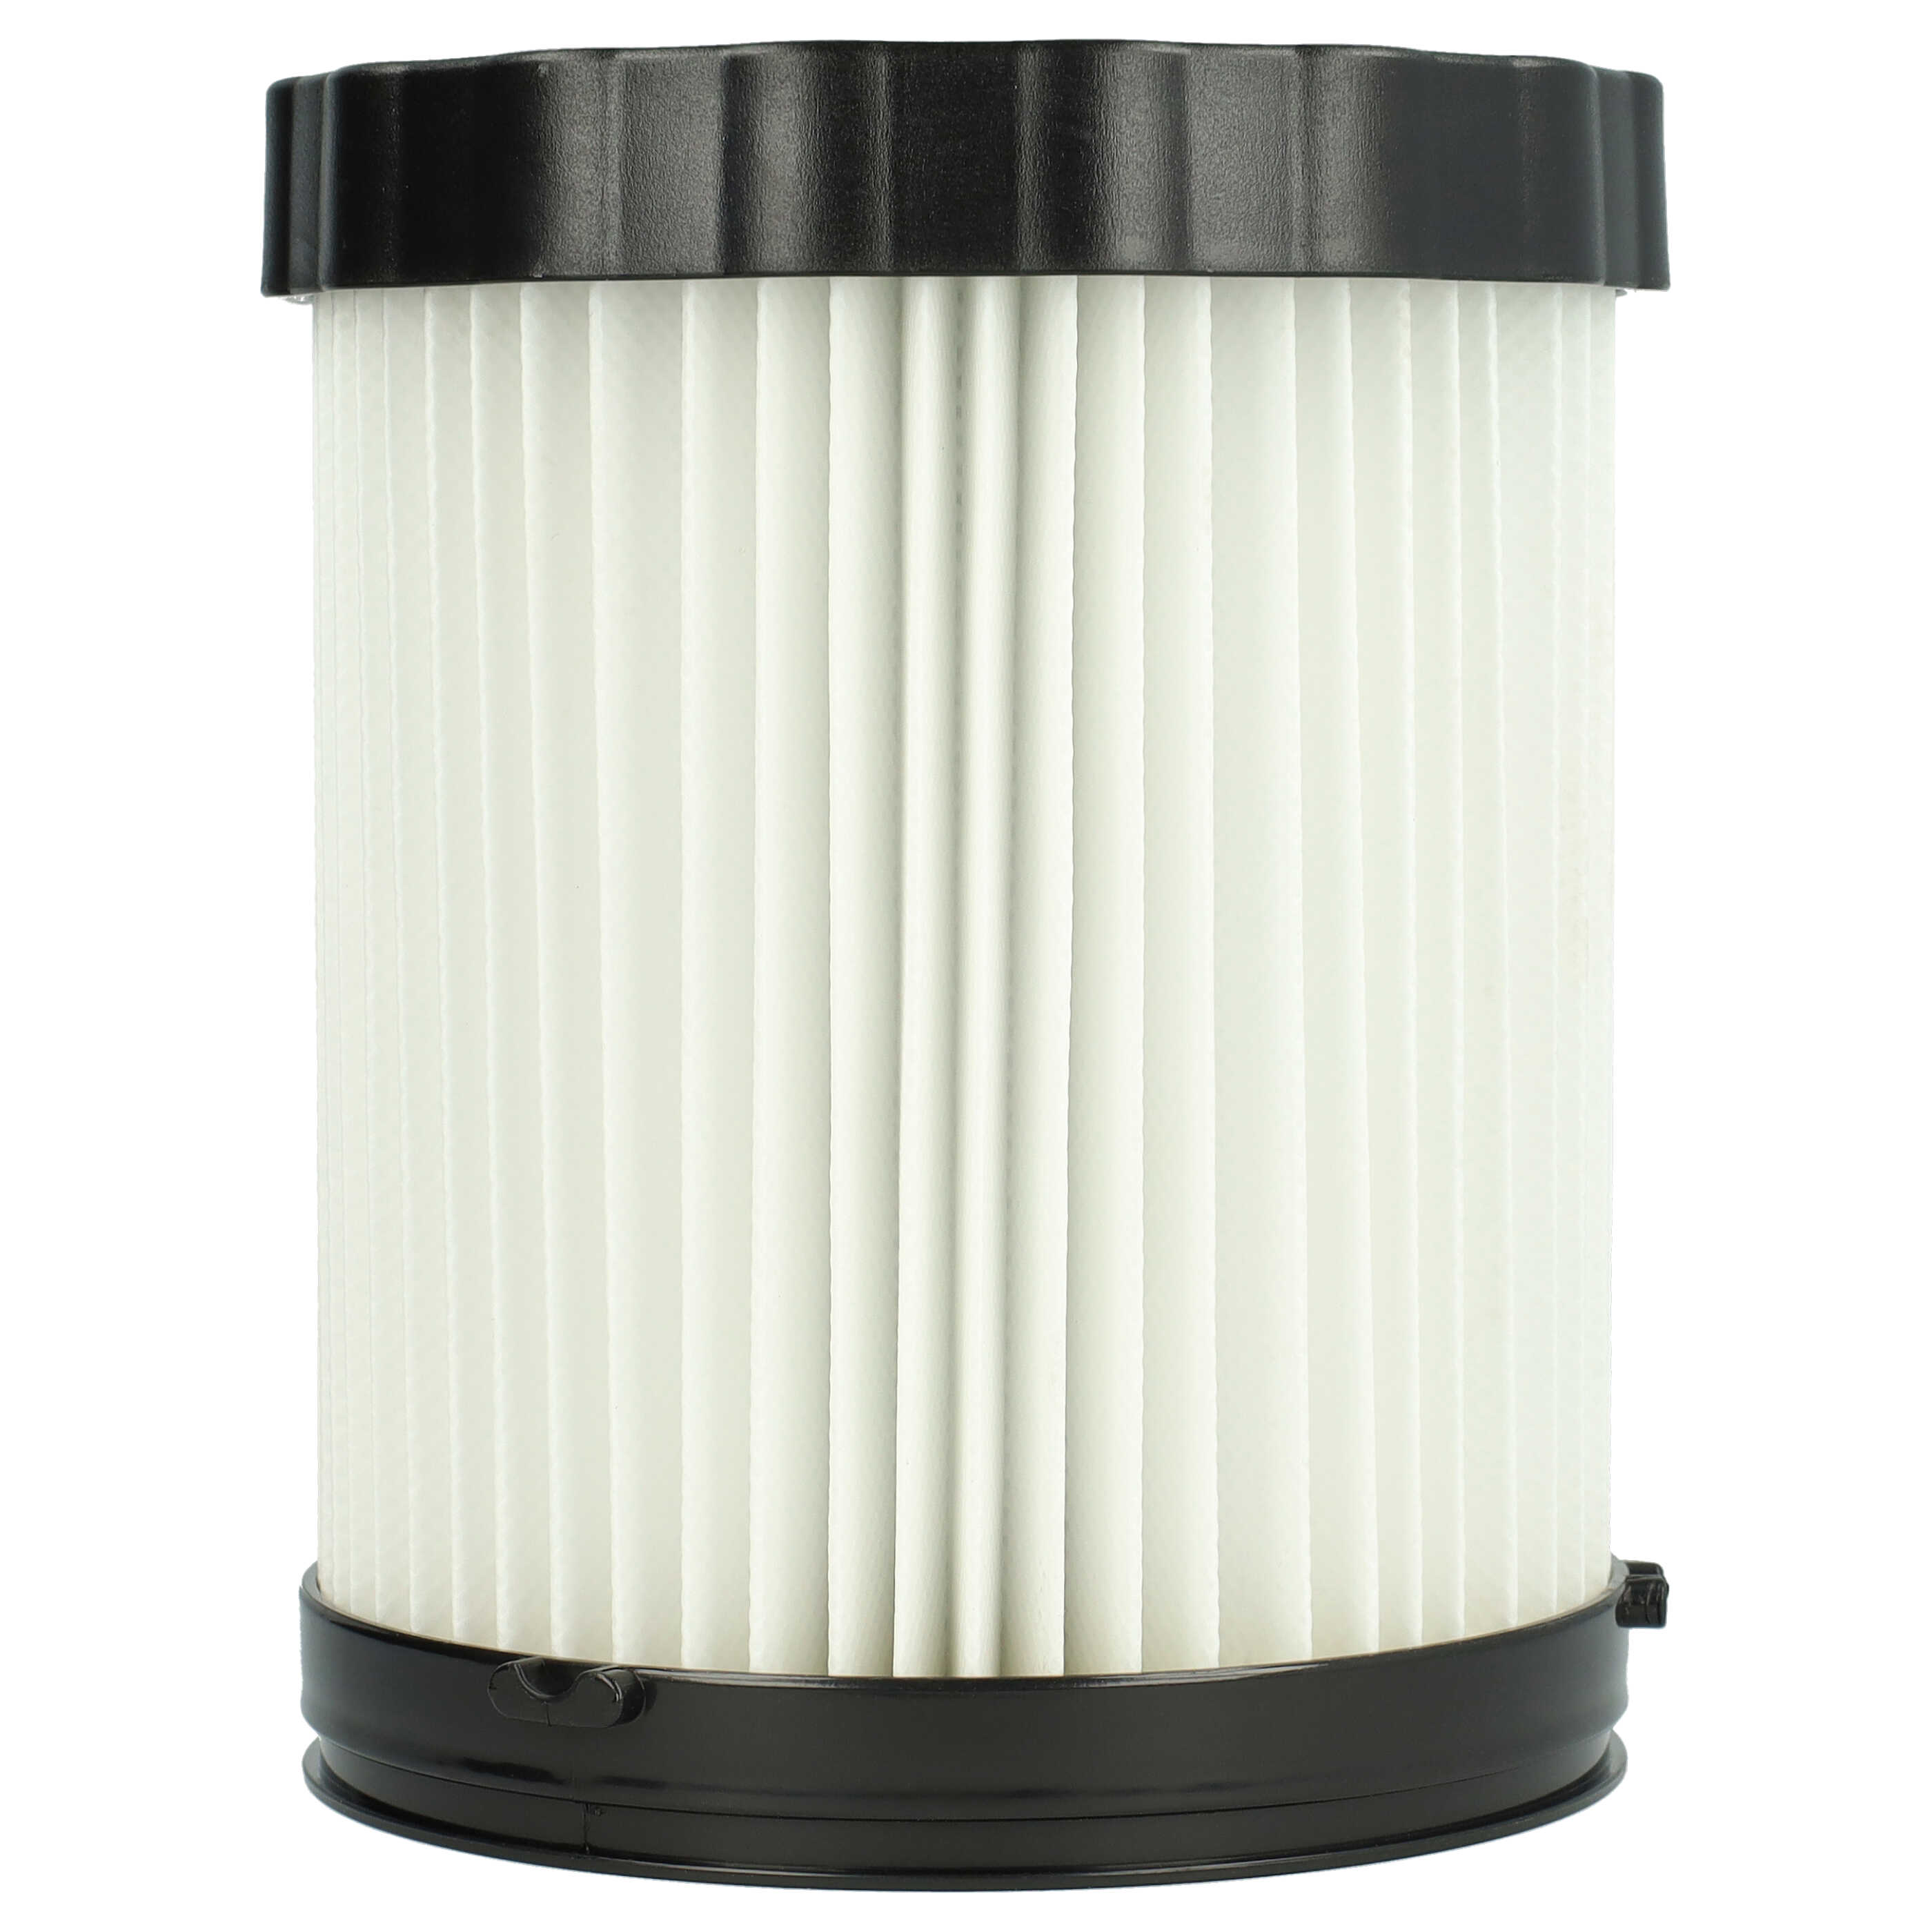 2x cartridge filter replaces Bosch 1 600 A01 1RT, 3165140917940, 2 608 000 663 for BoschVacuum Cleaner, white